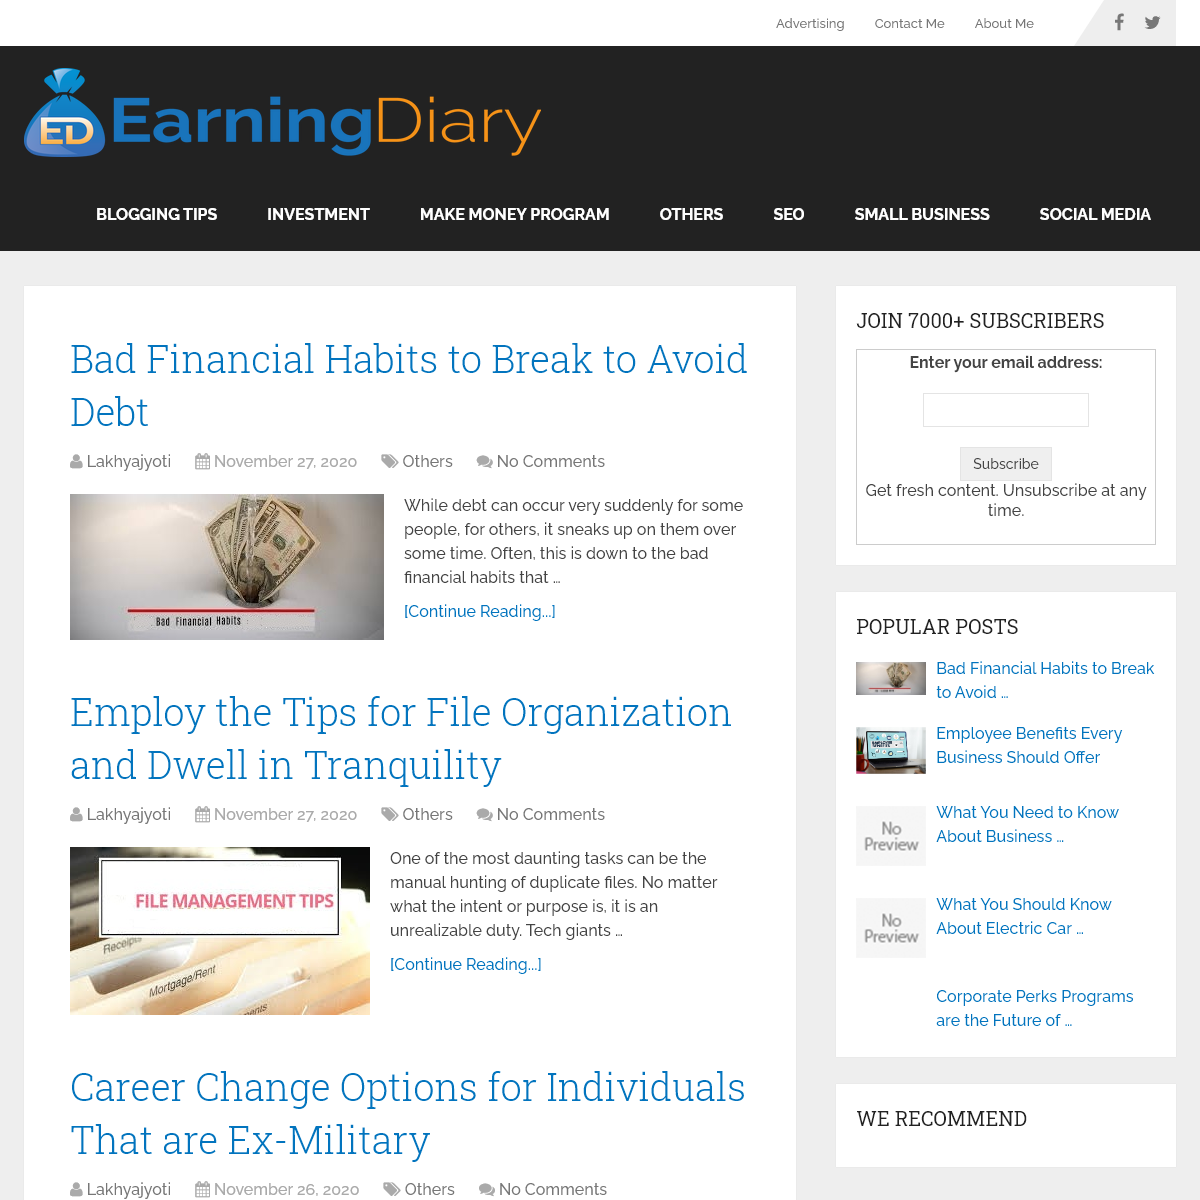 A complete backup of earningdiary.com